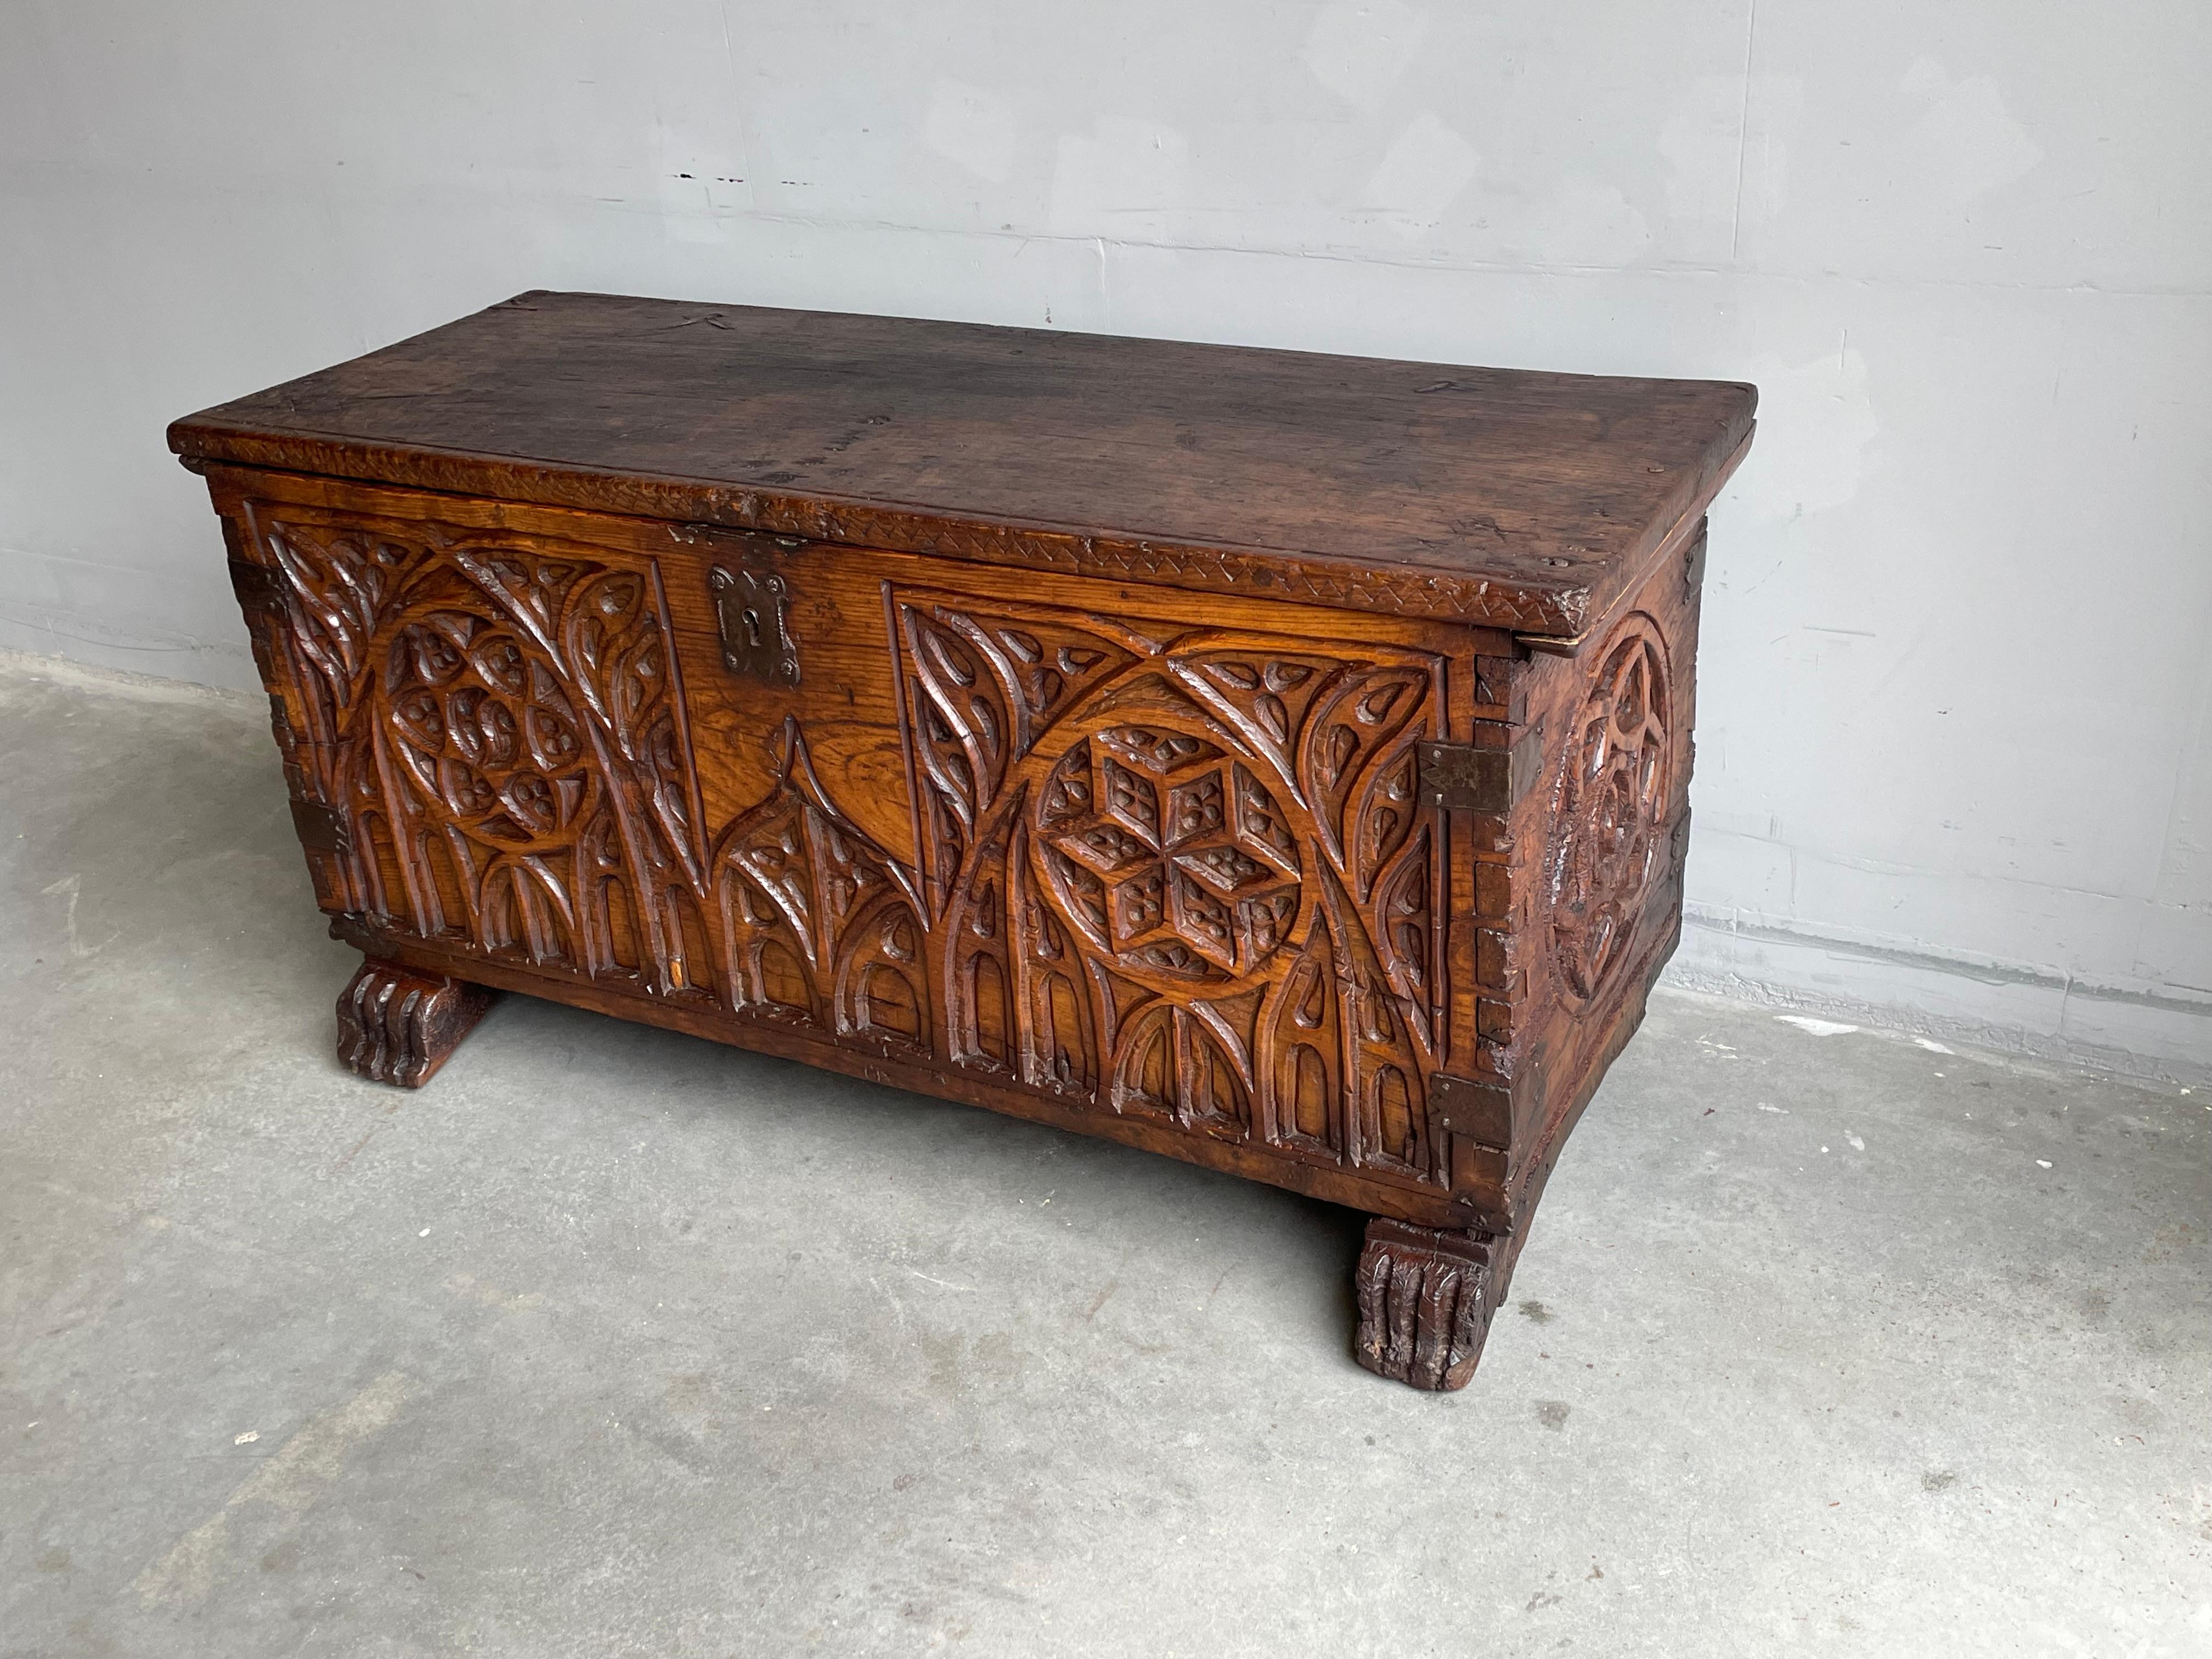 Marvelously hand-crafted chest from the late 1600s or early 1700s.

One of the things that make antiques so appealing & attractive is the fact that most pieces were handmade in recognizable styles, with proven techniques AND with natural materials